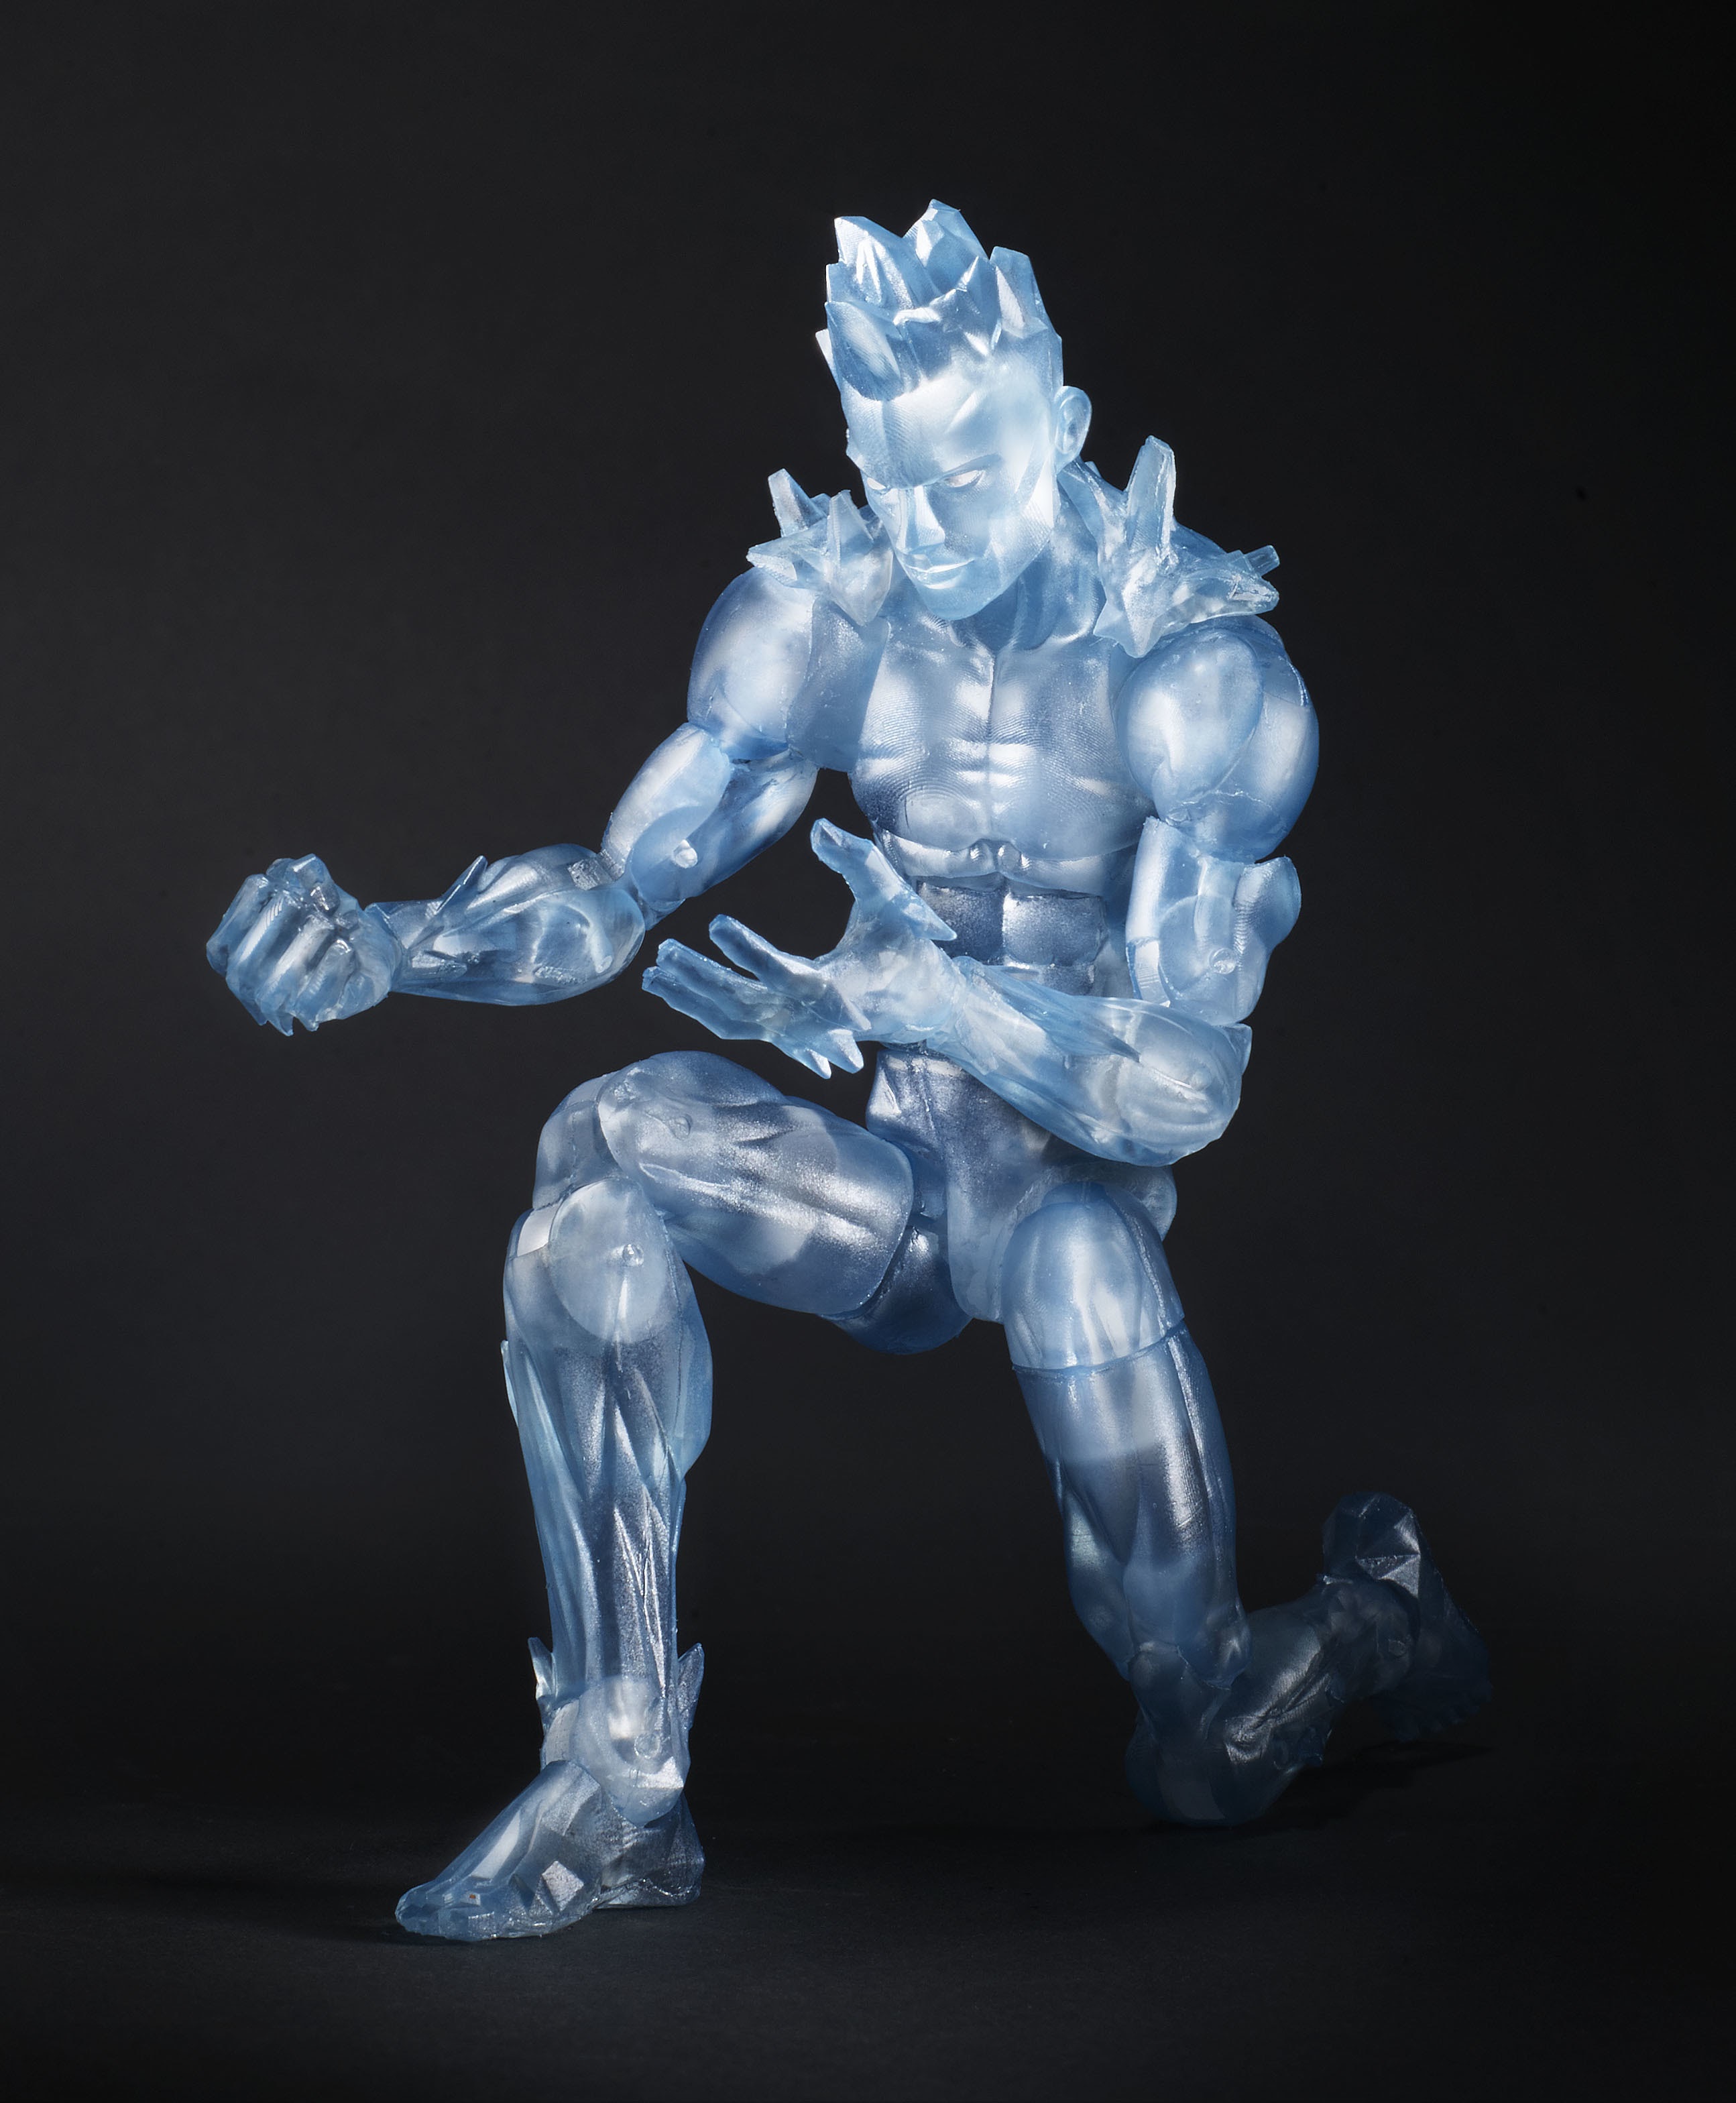 Iceman Large 300DPI Large Batch of Hasbro Marvel & Star Wars Figure Images From Toy Fair